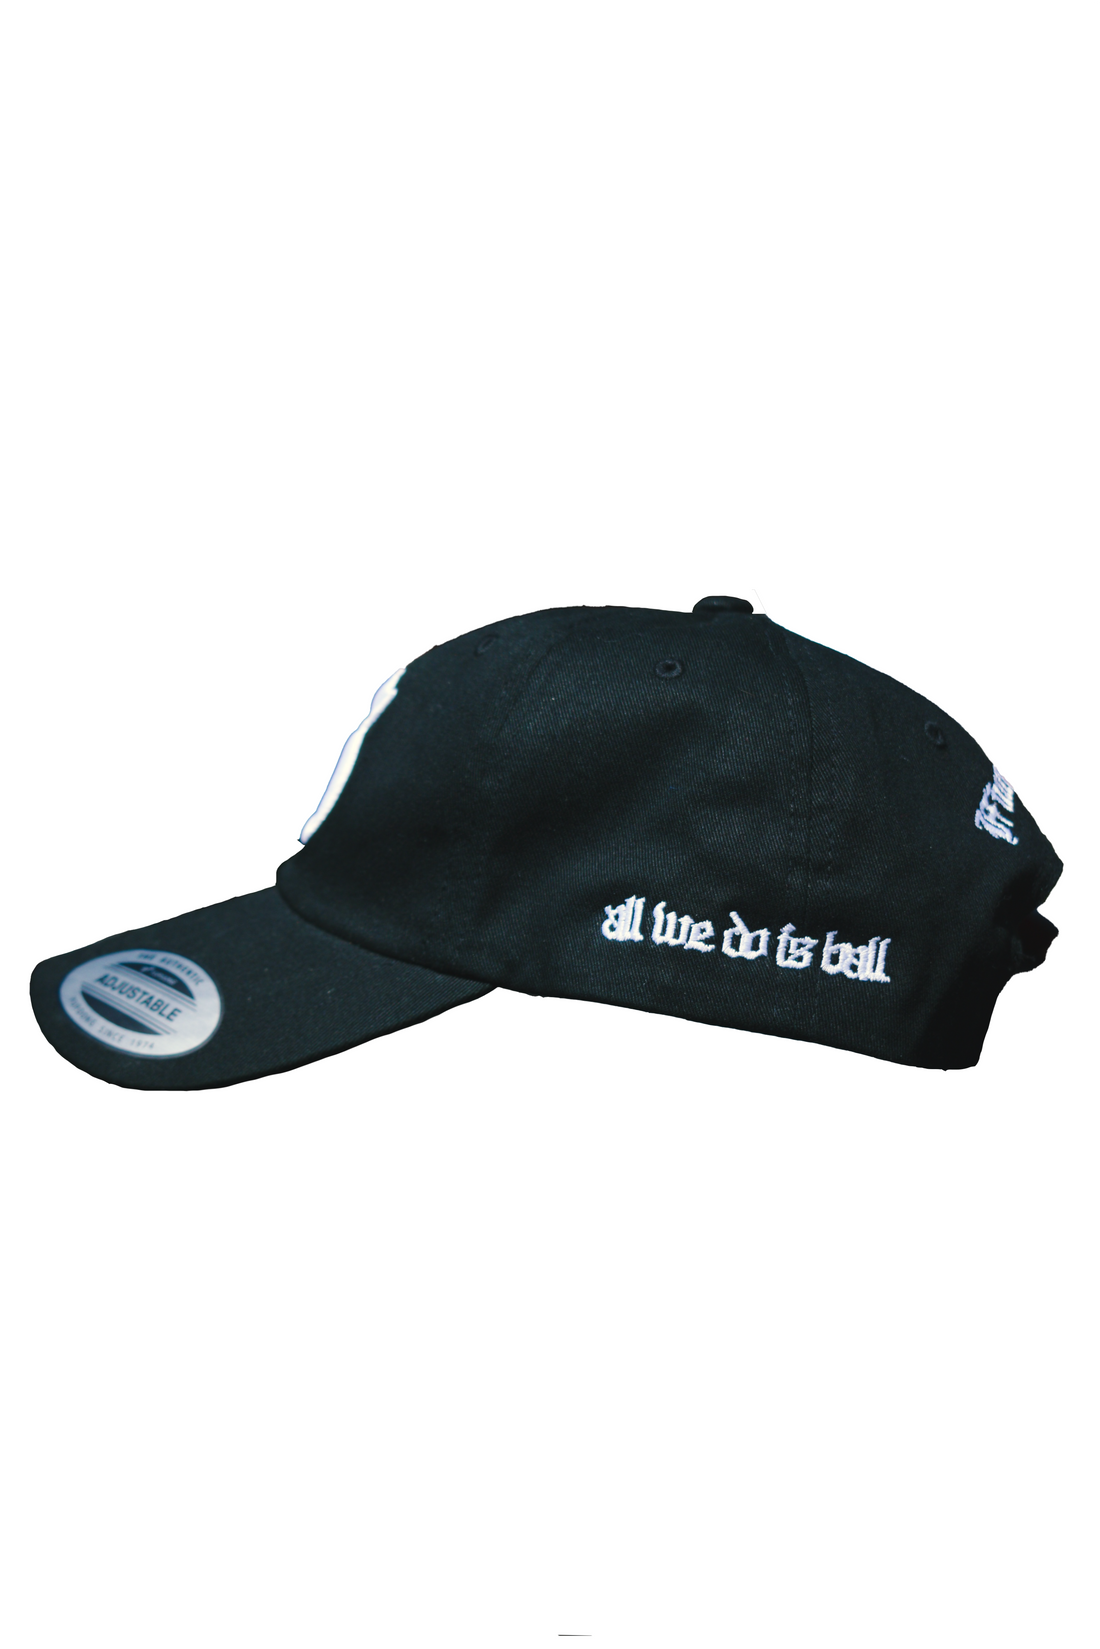 All we Do Is Ball Hat ( Black )